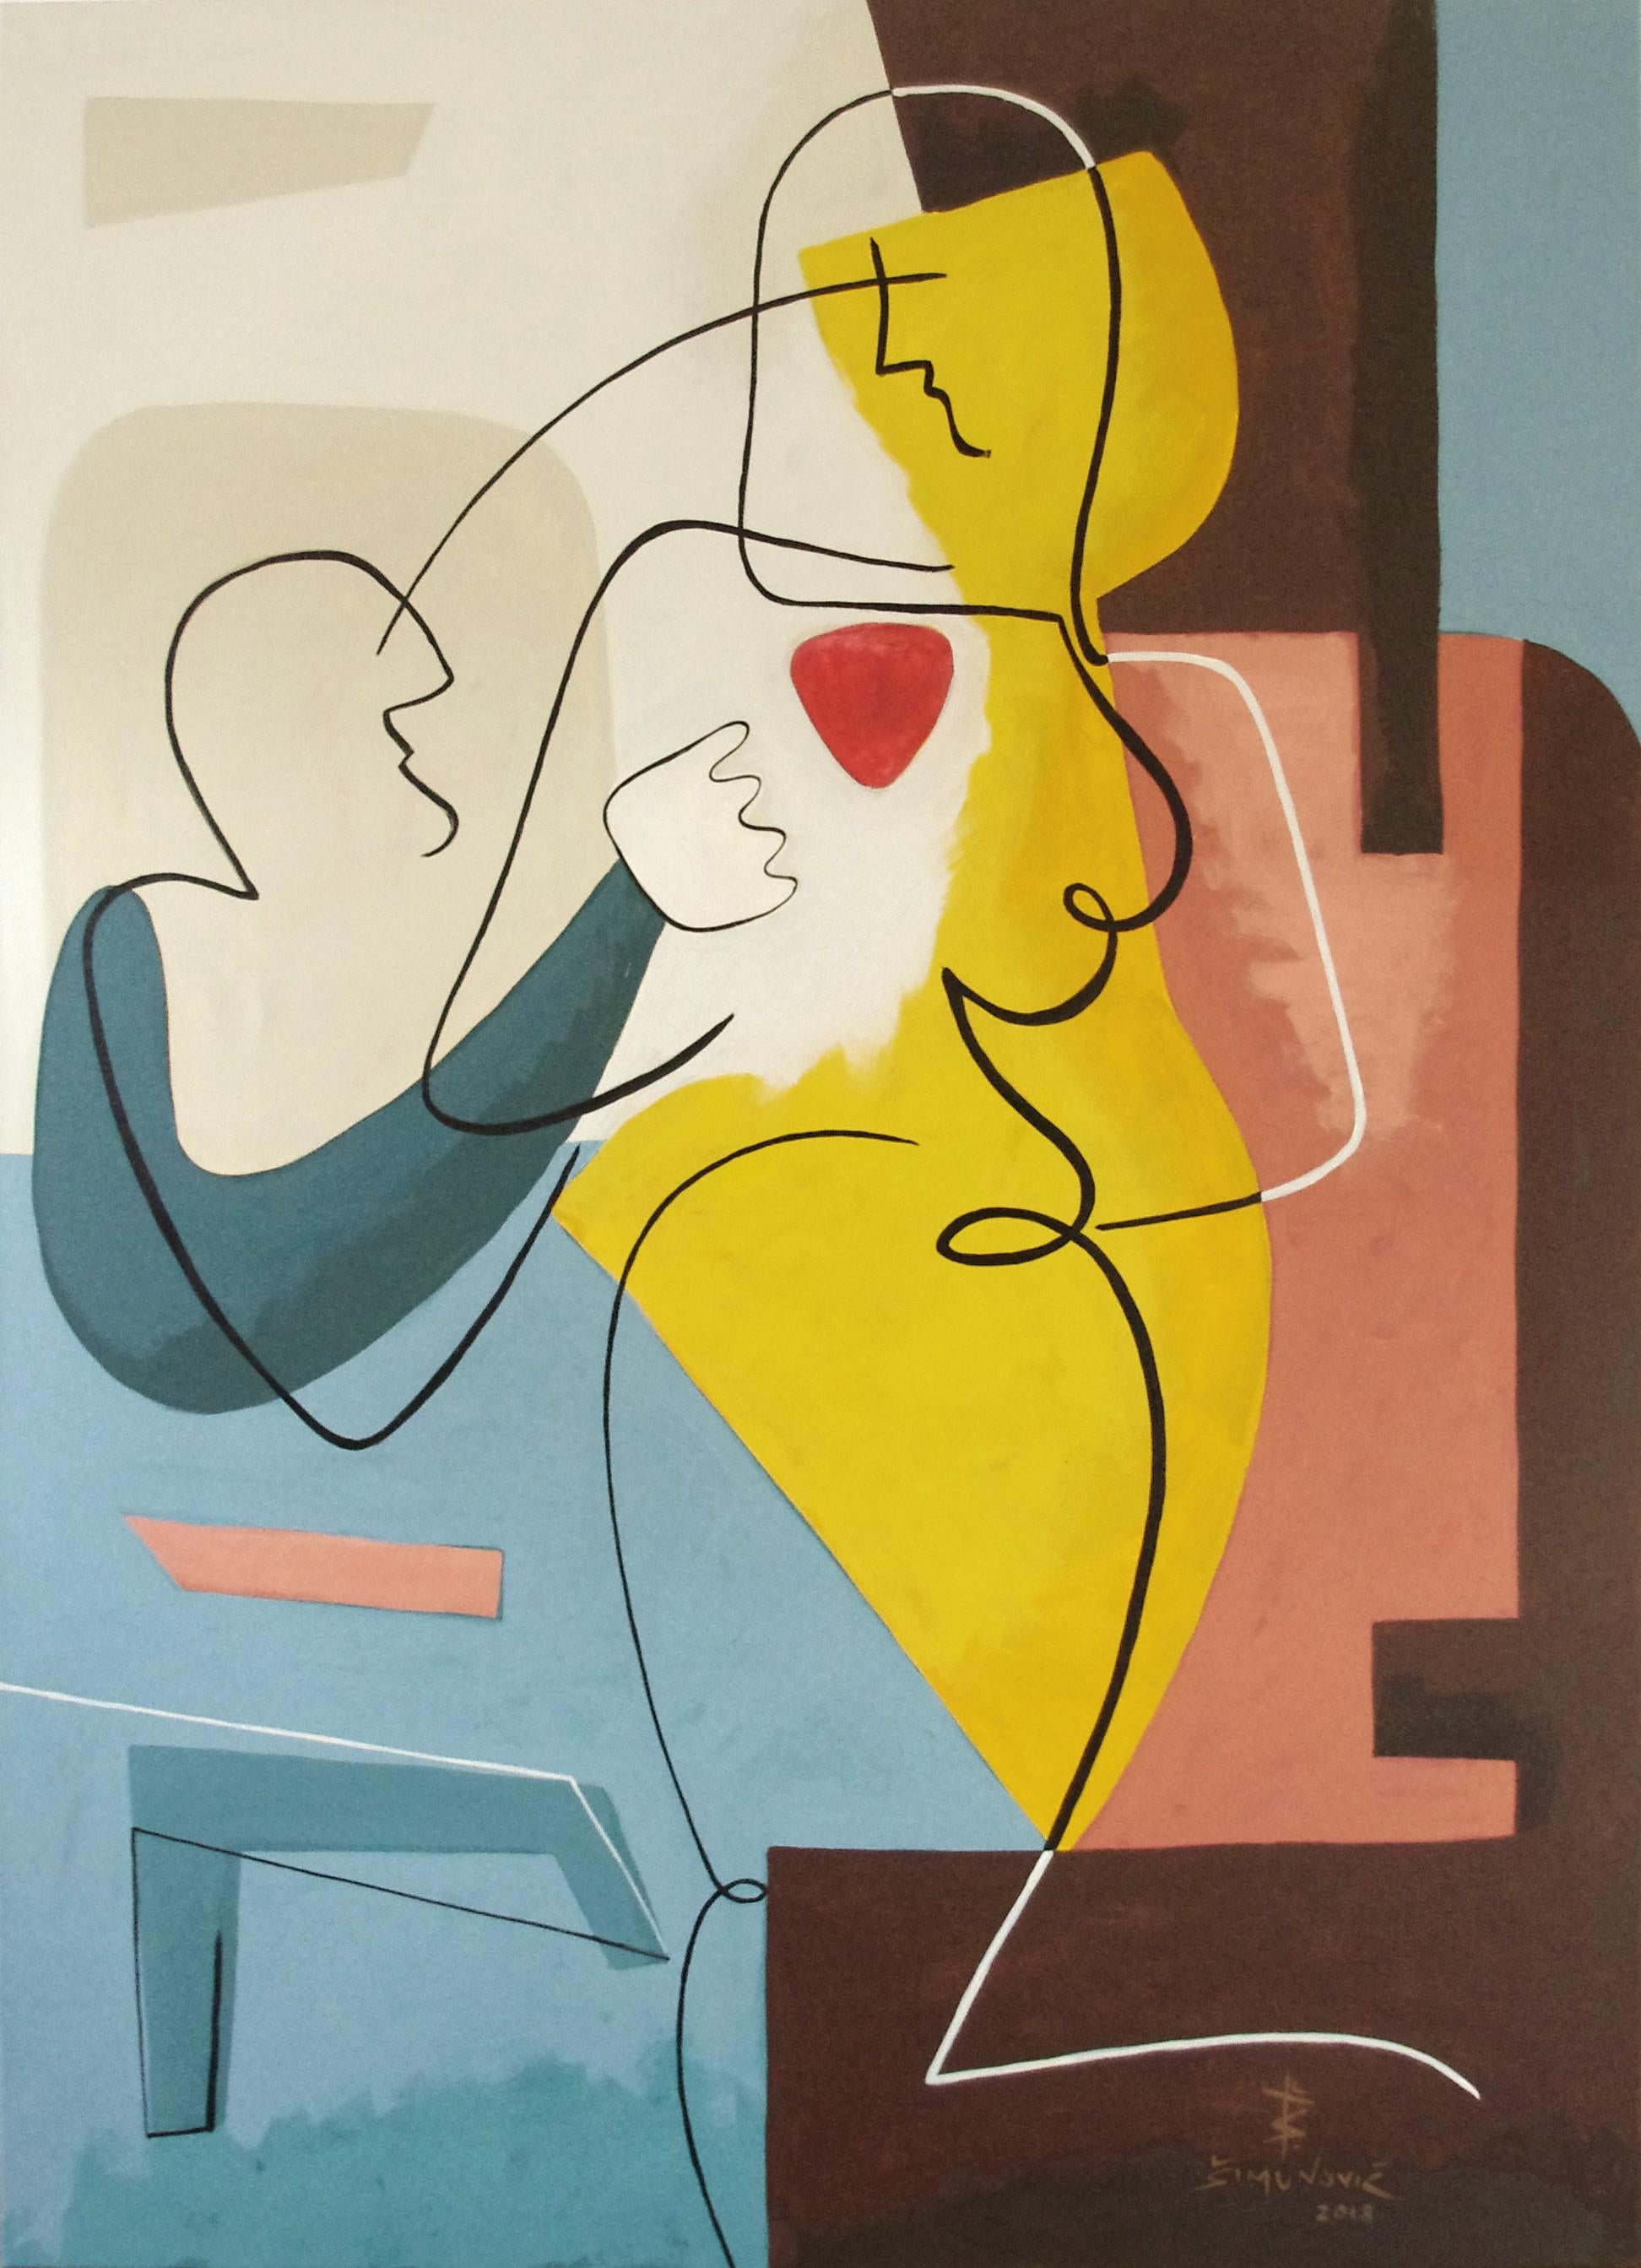 'Two of hearts' by Bernard Simunovic, acrylic on canvas, abstract

Bernard Simunovic plays with color, form and minimalistic lines in his abstract figurative paintings. His sculptured-like compositions, created with the meticulous application of